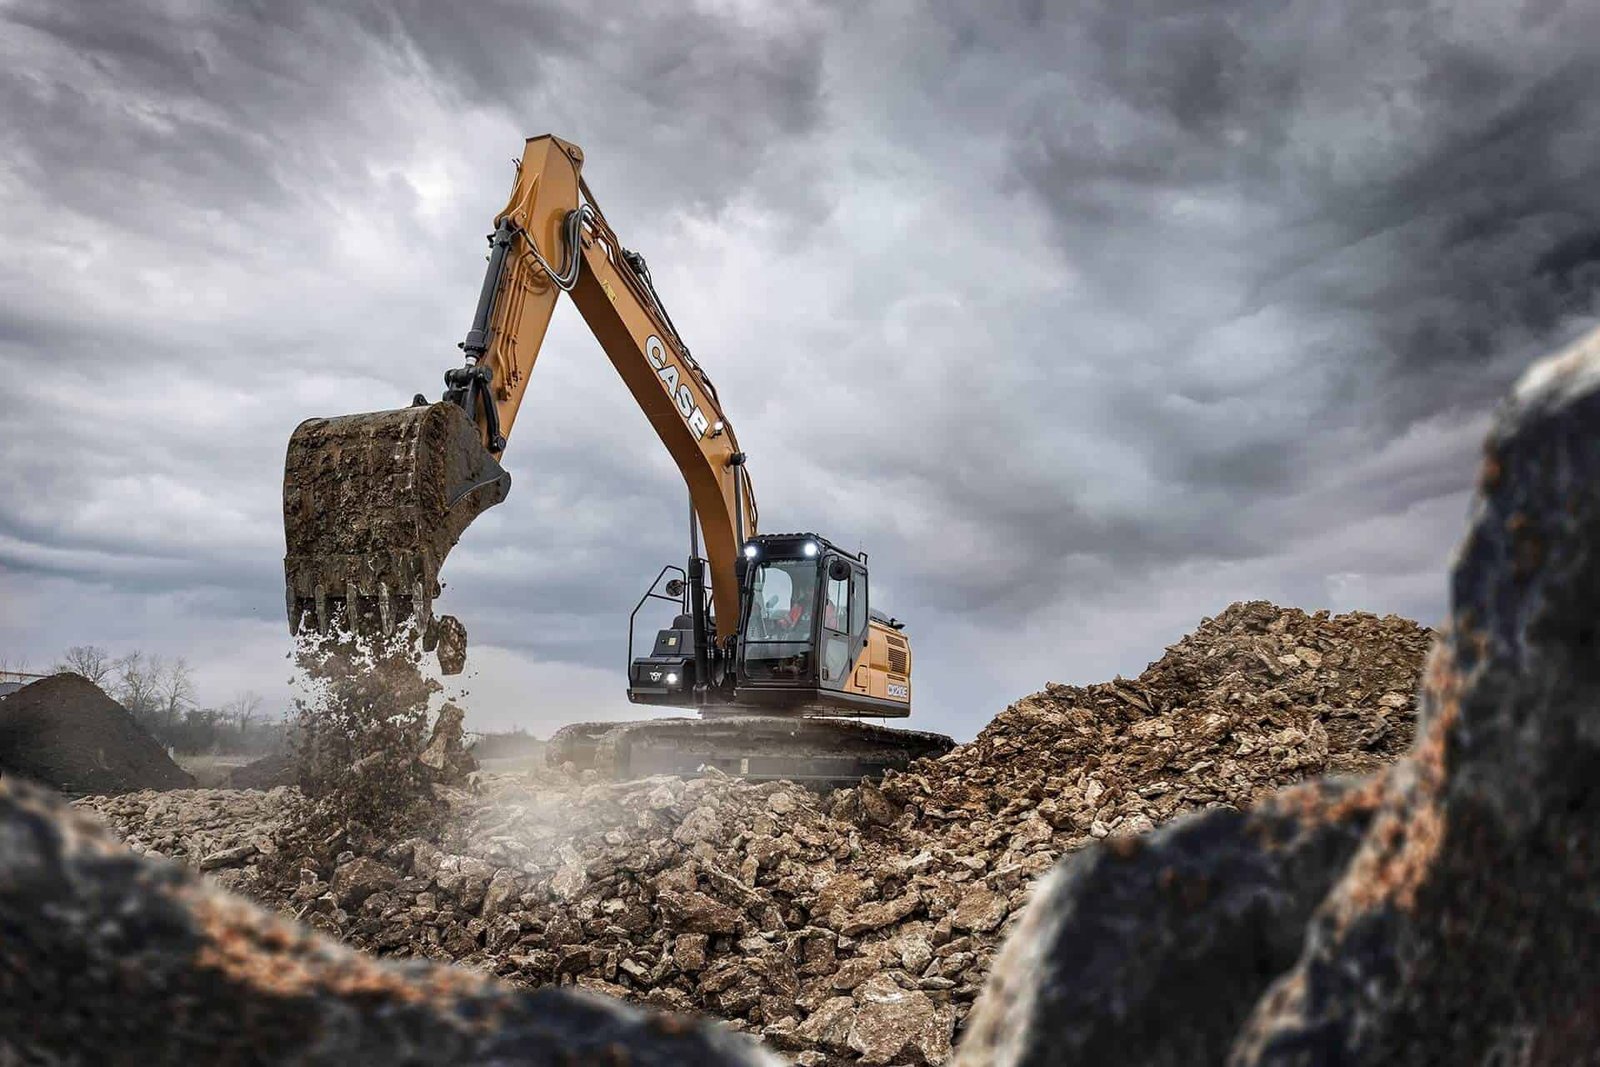 Photograph is showing the crawler excavator working productively with its long arm